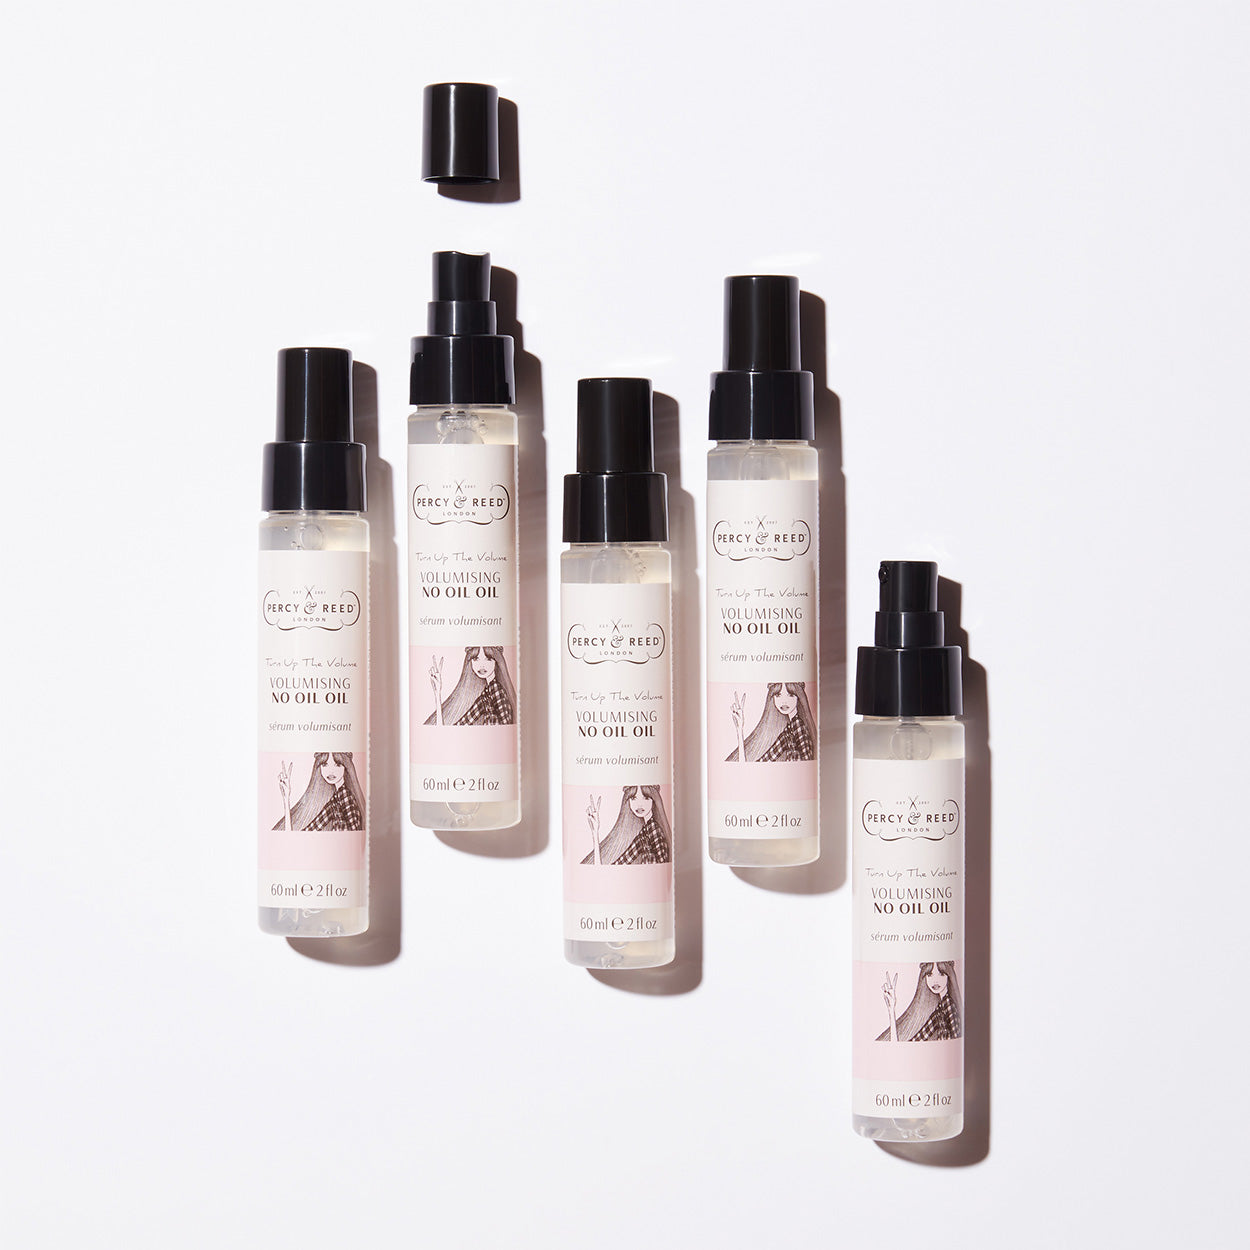 Smoothed, Sealed & Sensational Volumising No Oil Oil | Percy & Reed